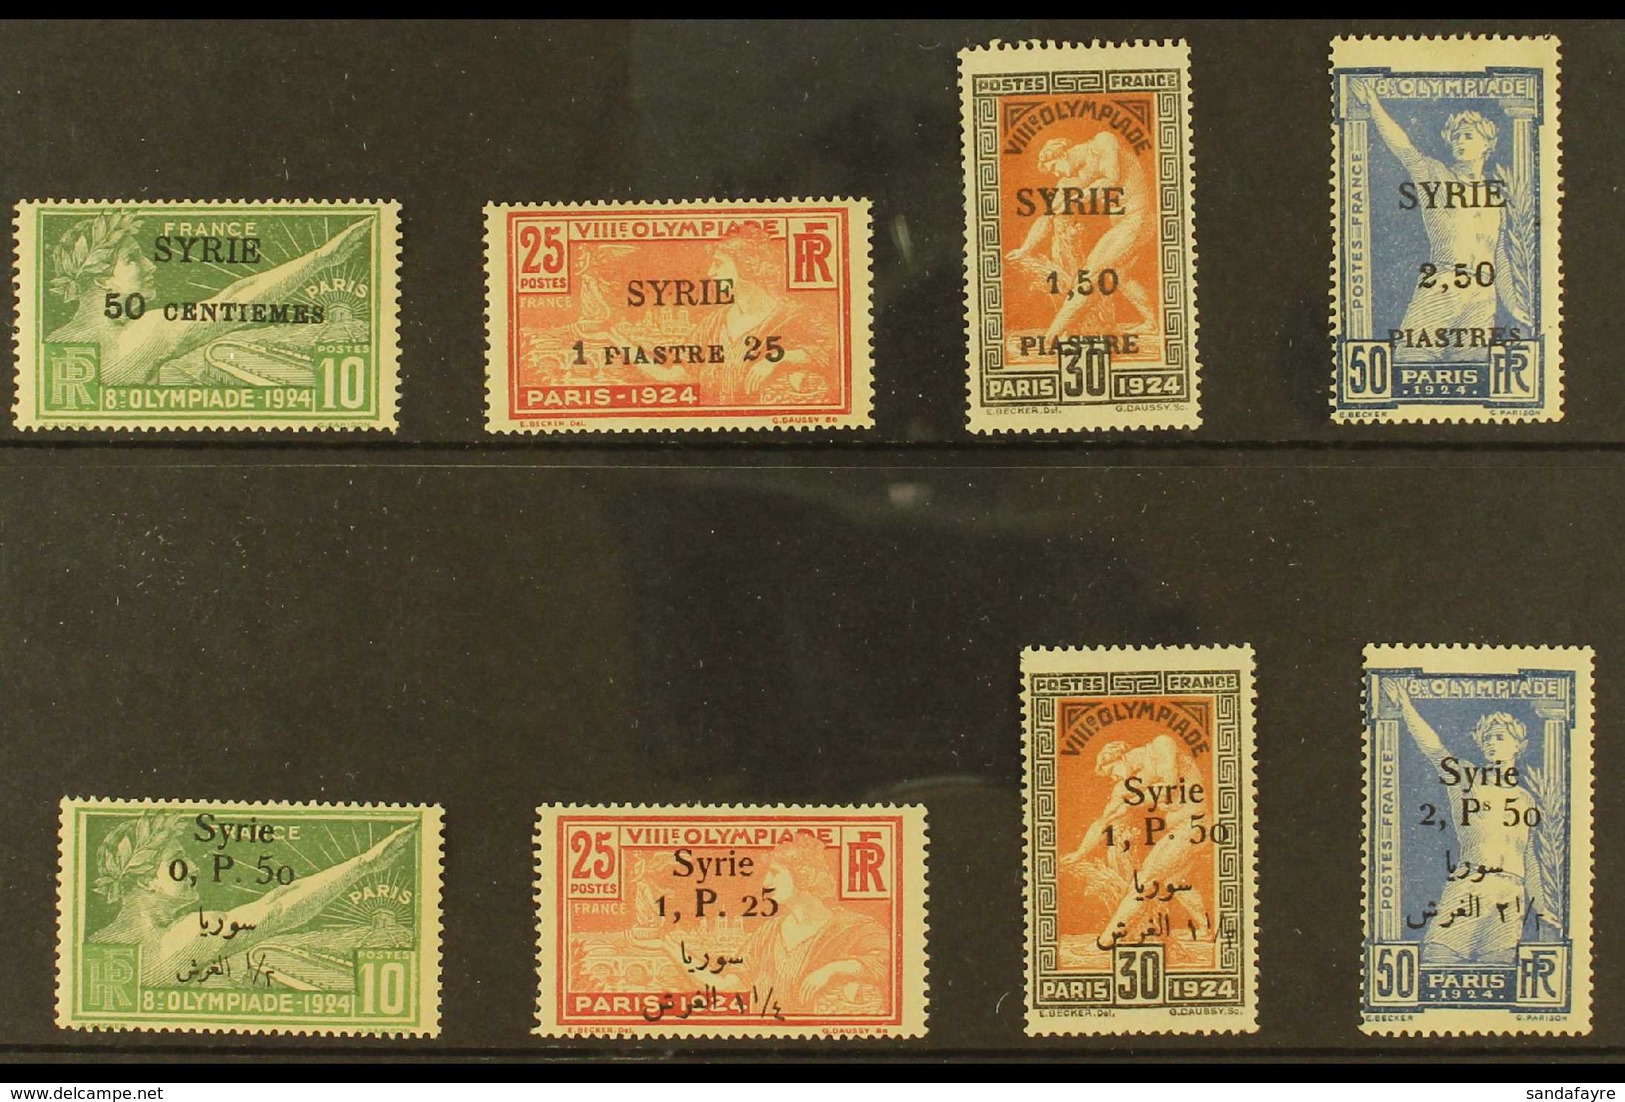 OLYMPIC GAMES SYRIA 1924 Olympic Games Both Surcharged Sets (Yvert 122/25 & 149/52) Never Hinged Mint. (8 Stamps) For Mo - Unclassified